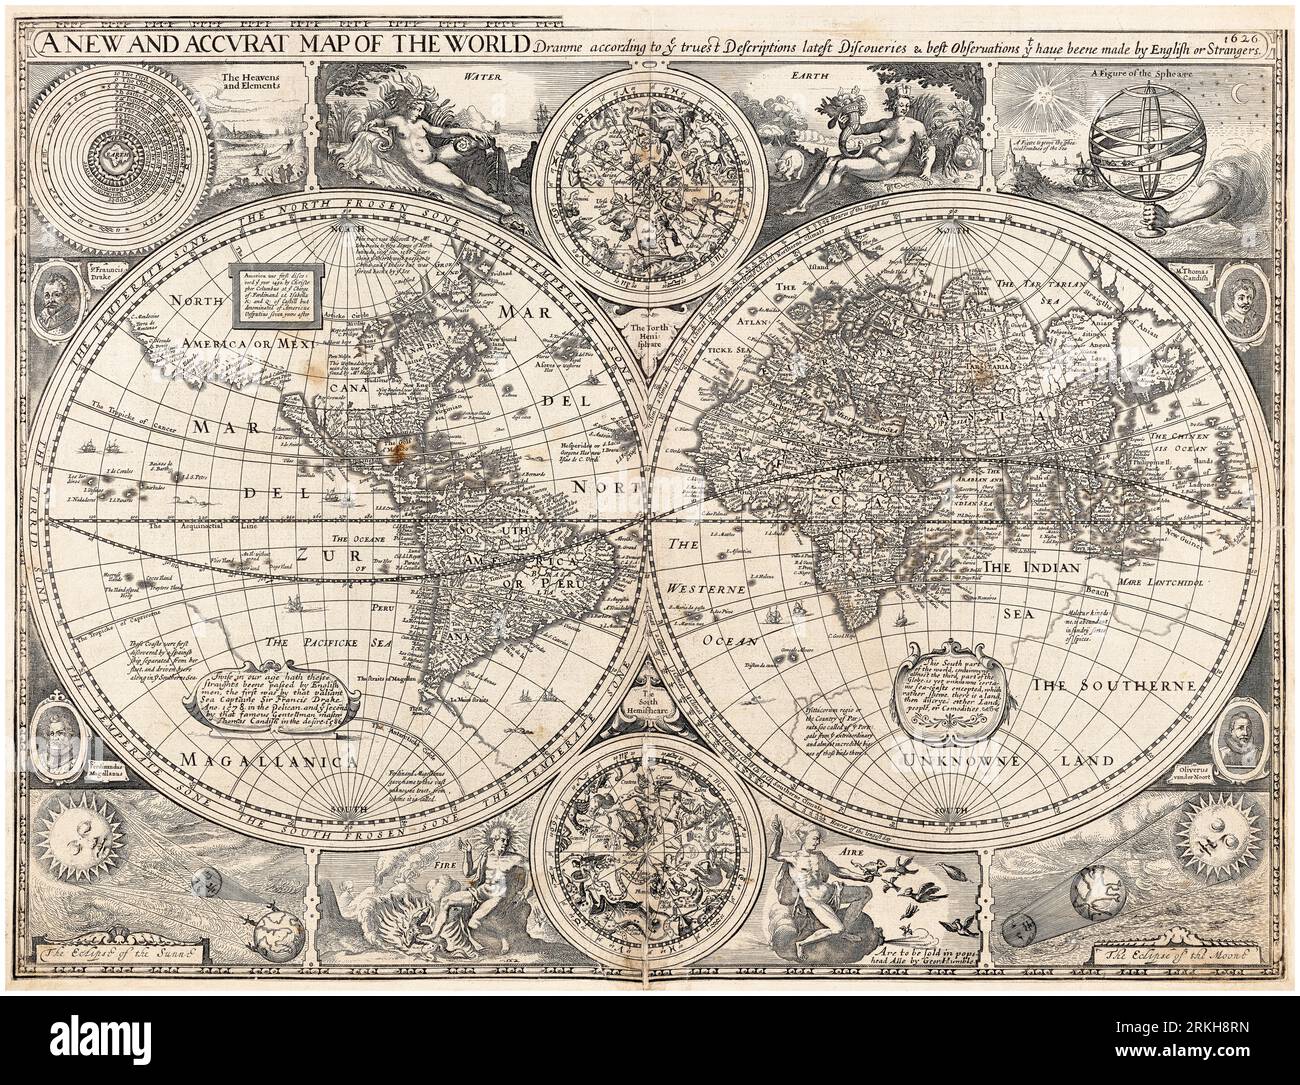 Vintage 17th Century World Map, A New and Accurate Map of the World, par John Speed, 1627 Banque D'Images